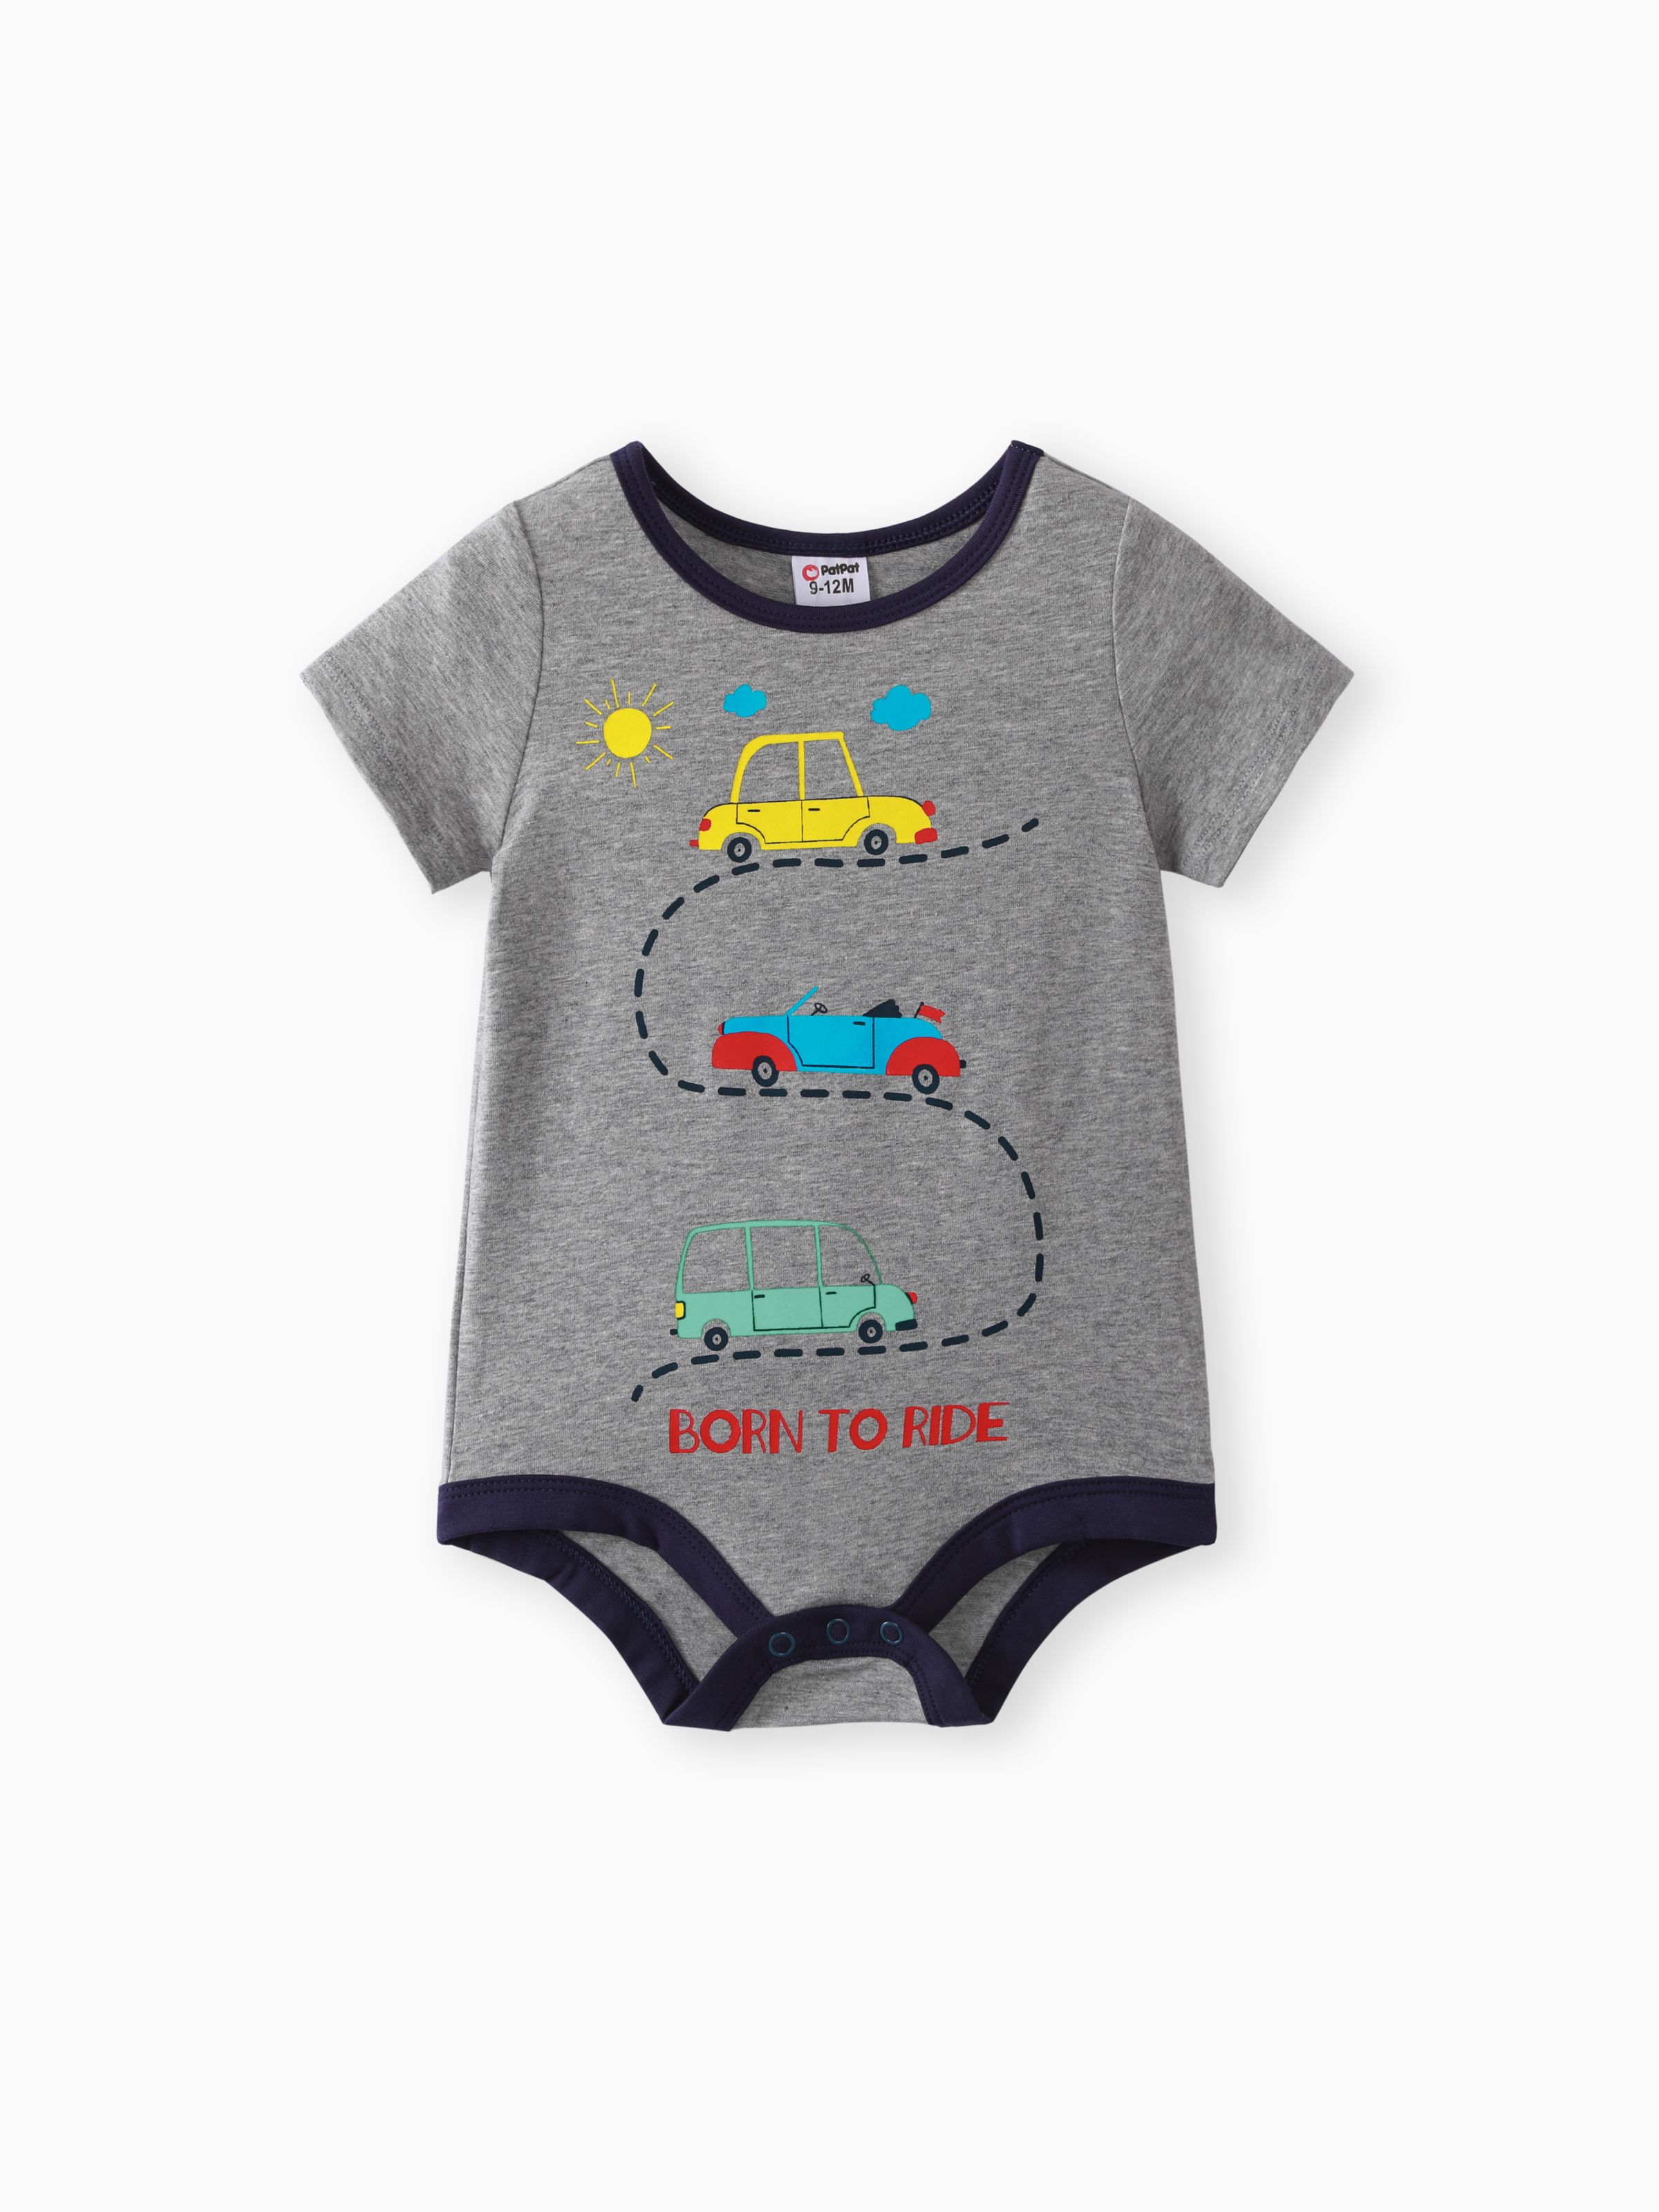 

Naia™ Baby Boy Colorful Striped or Vehicle Print Short-sleeve Romper